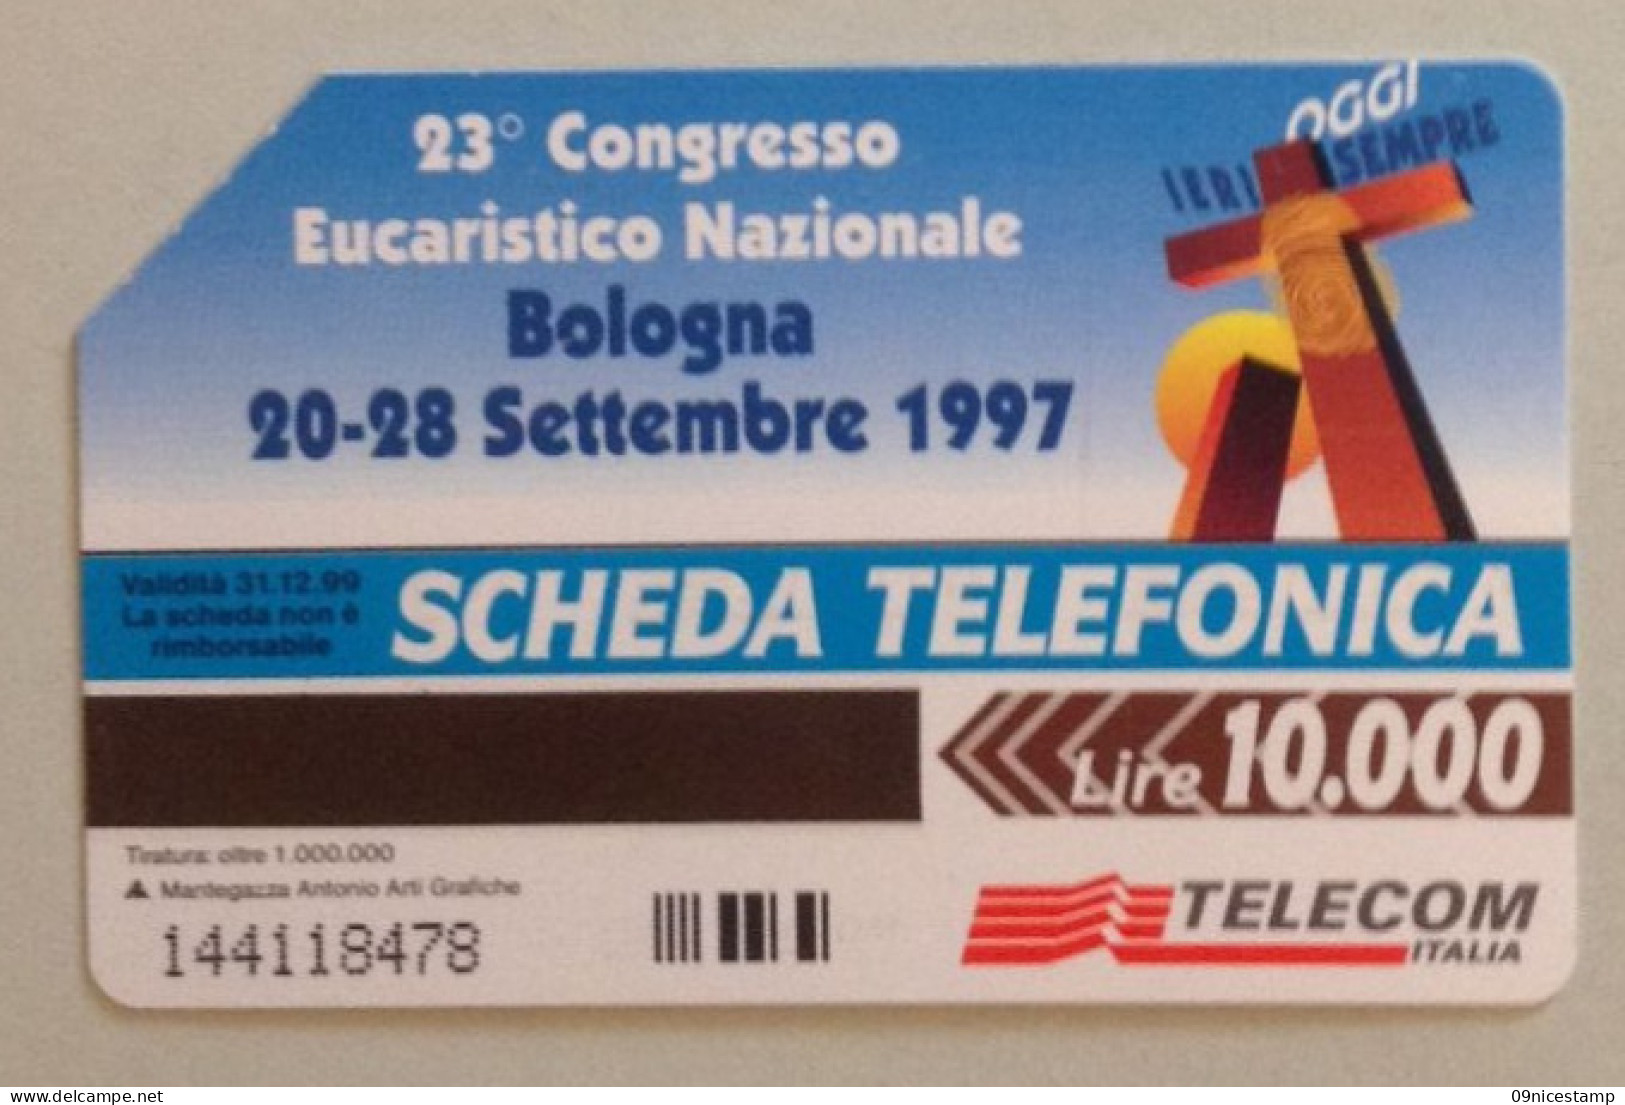 Italy, Telephonecard, Empty And Used - Public Ordinary